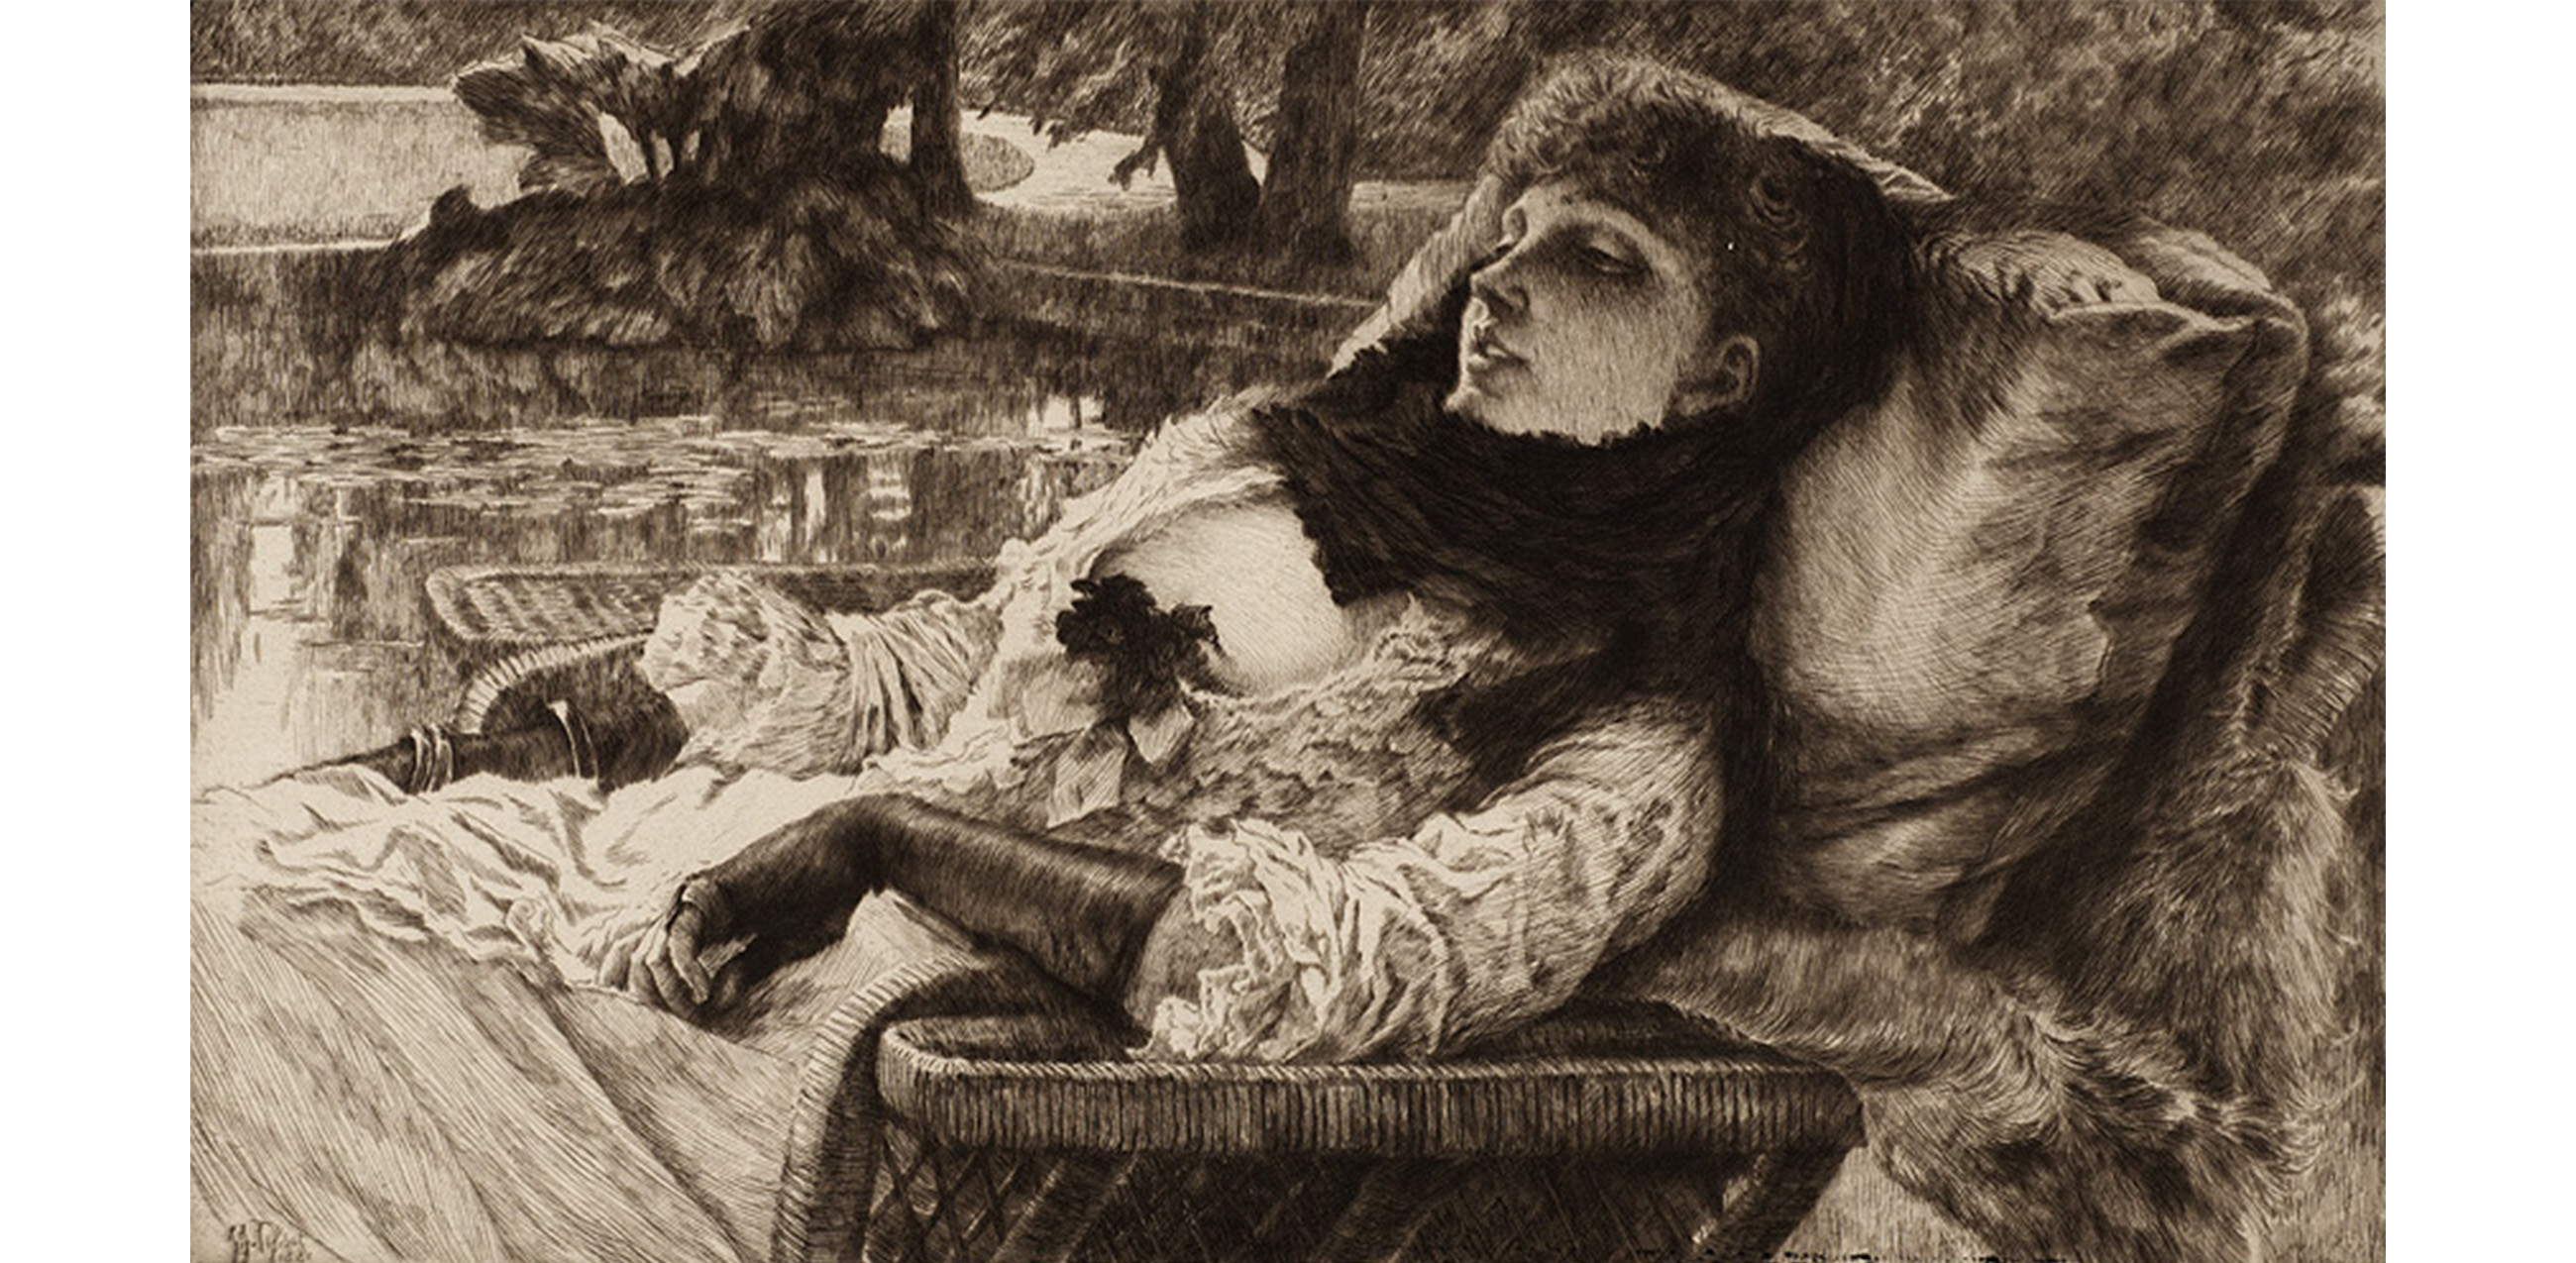 profile view of woman wearing dress with high collar, reclining on a lawn chair